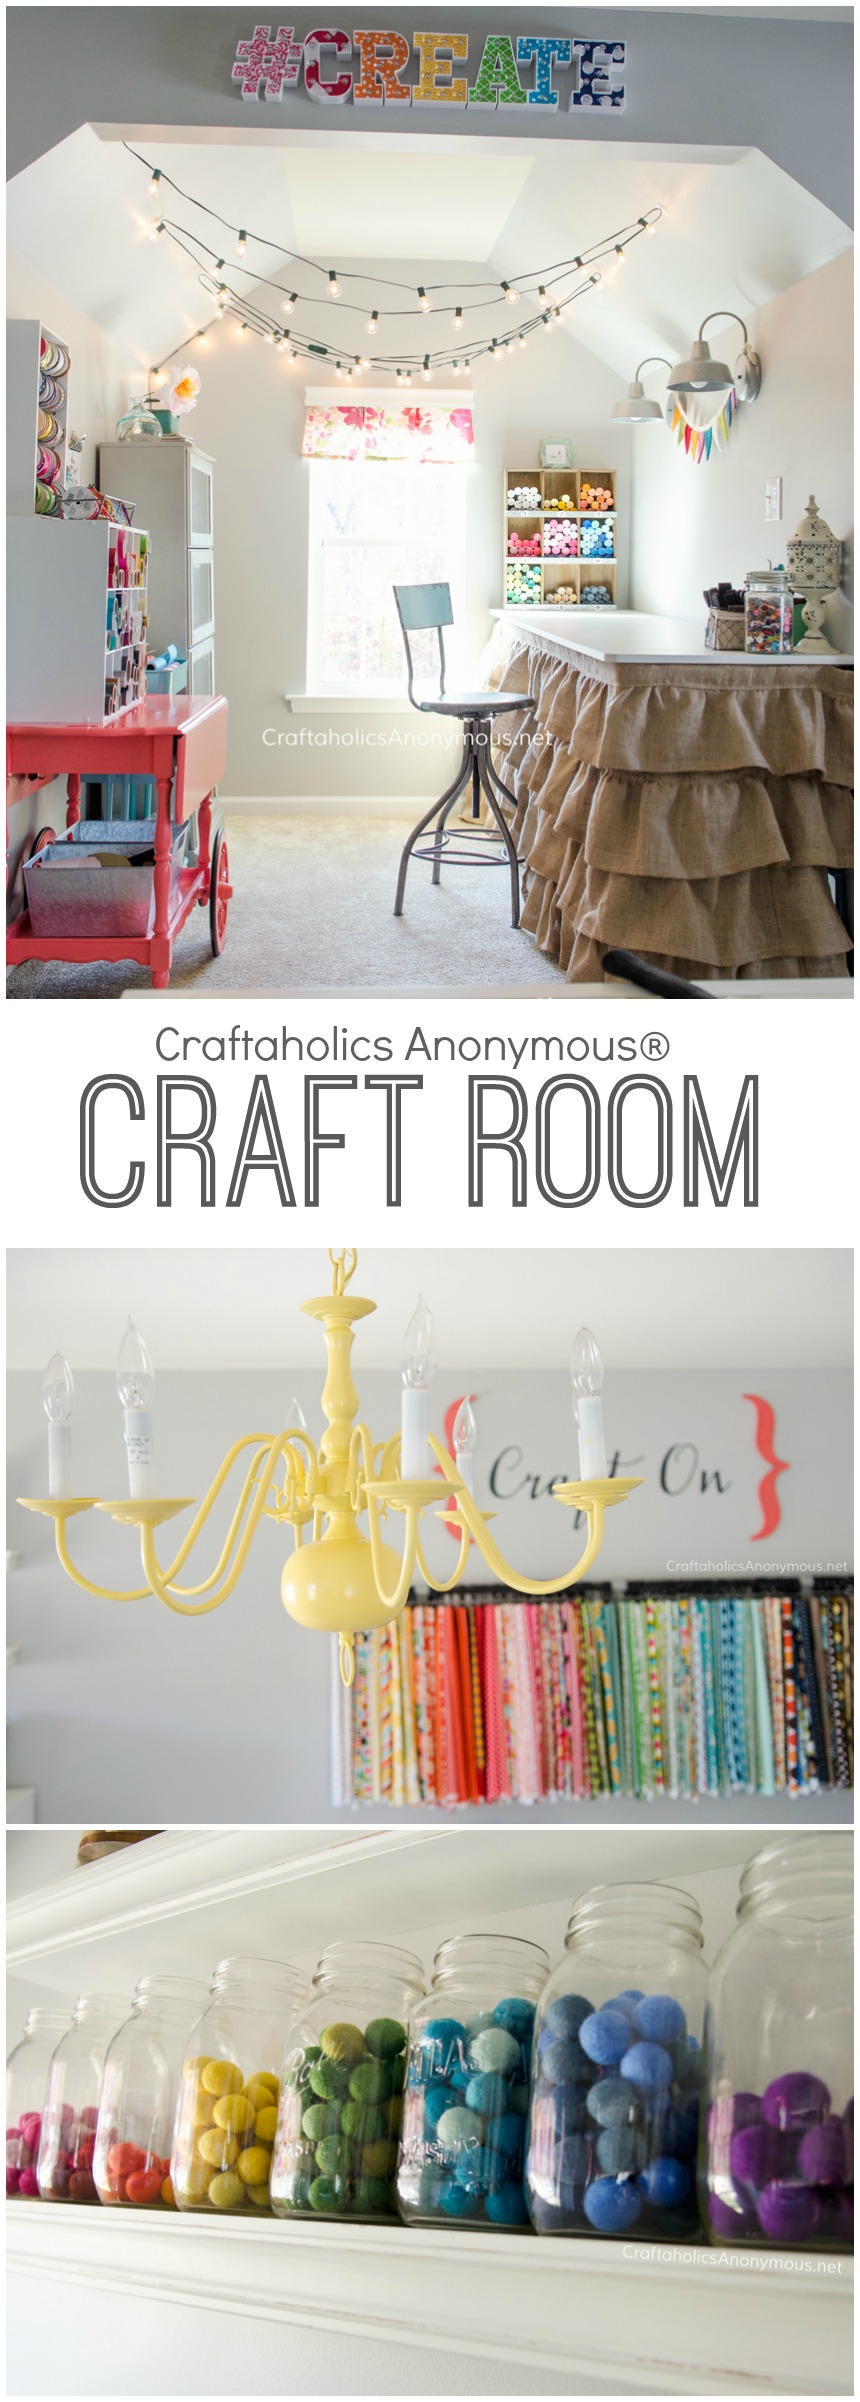 Dream Craft Room with loads of awesome craft room storage and organization ideas! a MUST SEE craft room! www.CraftaholicsAnonymous.net